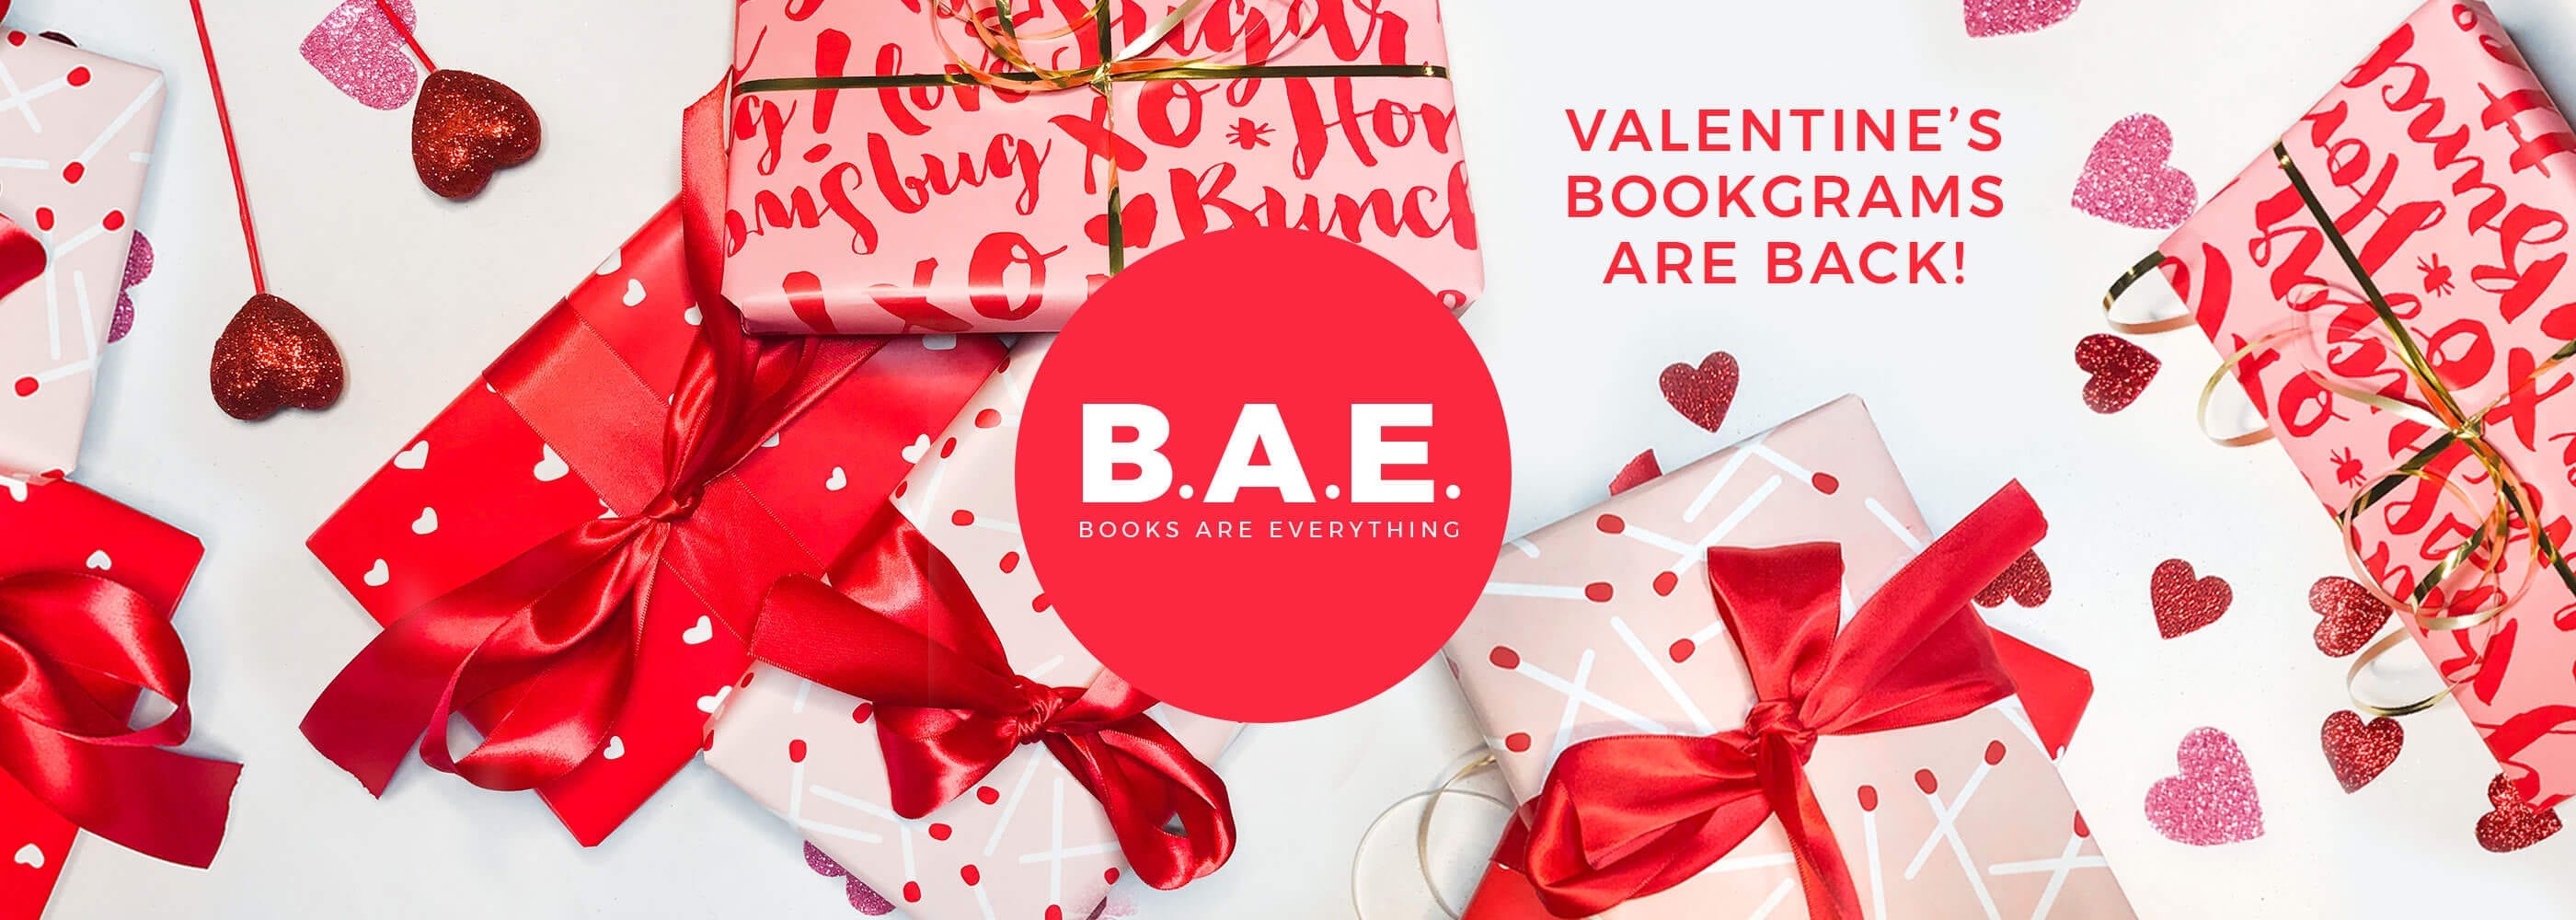 Valentines Bookgrams are back